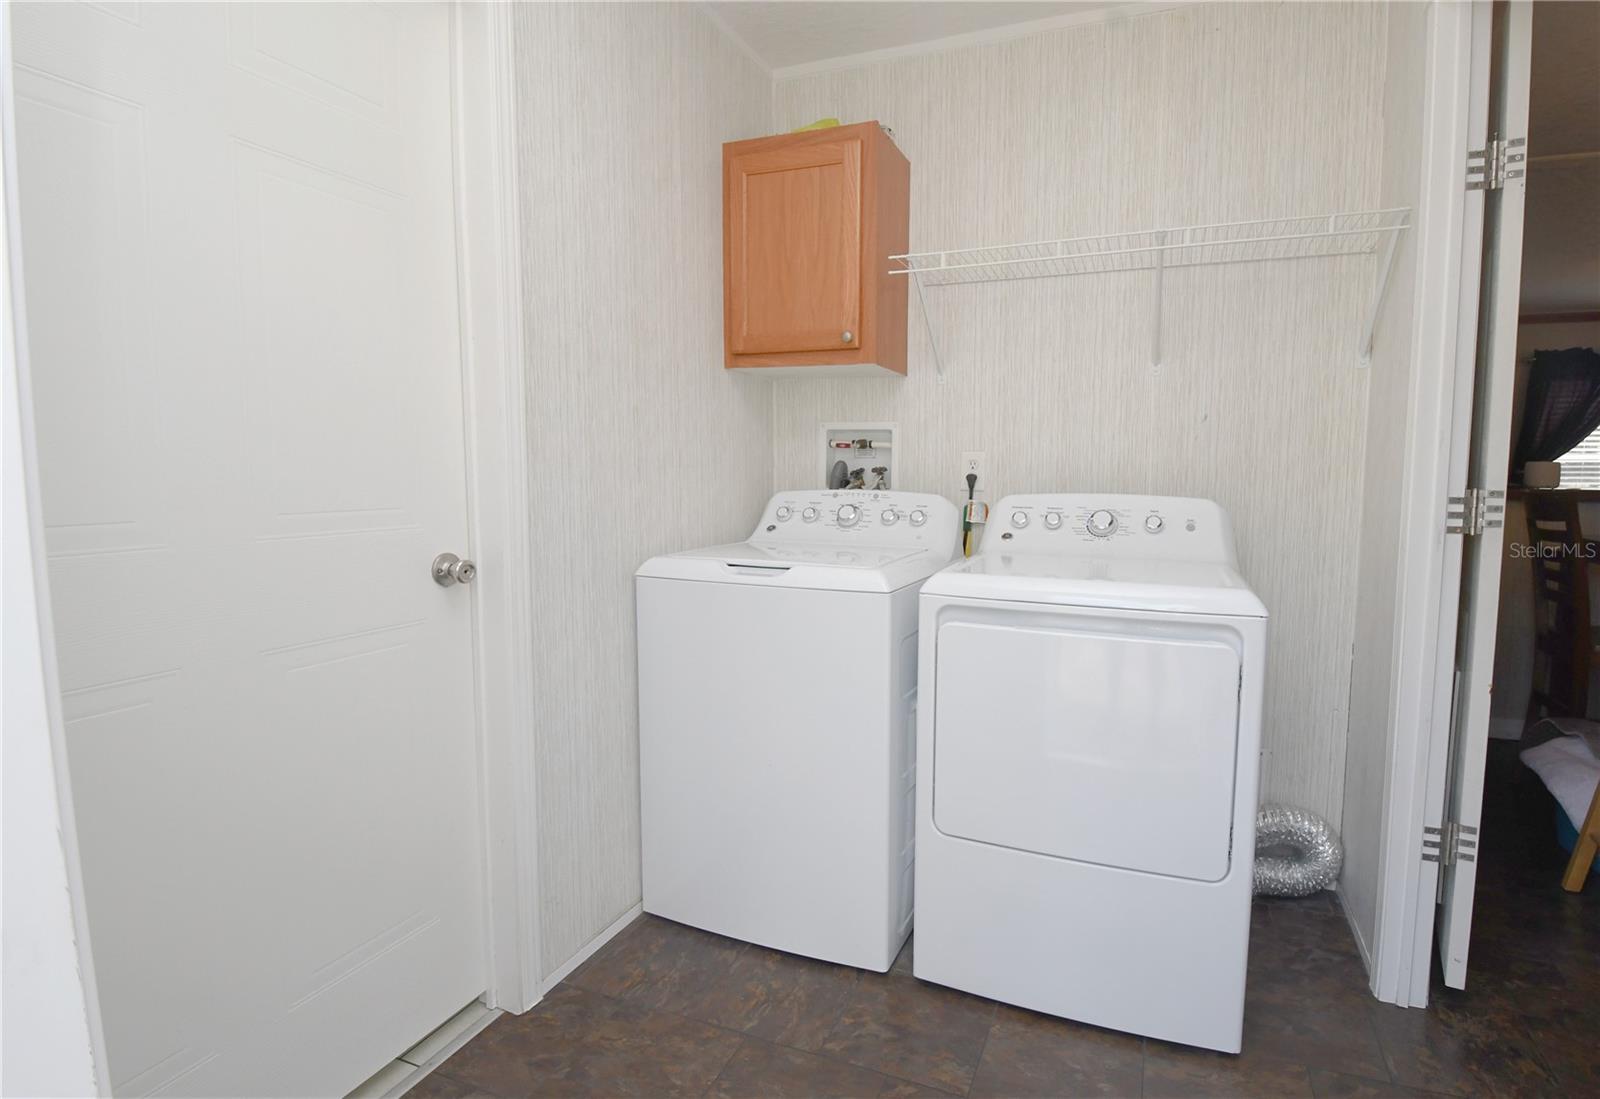 The laundry room features  new GE washer and dryer.